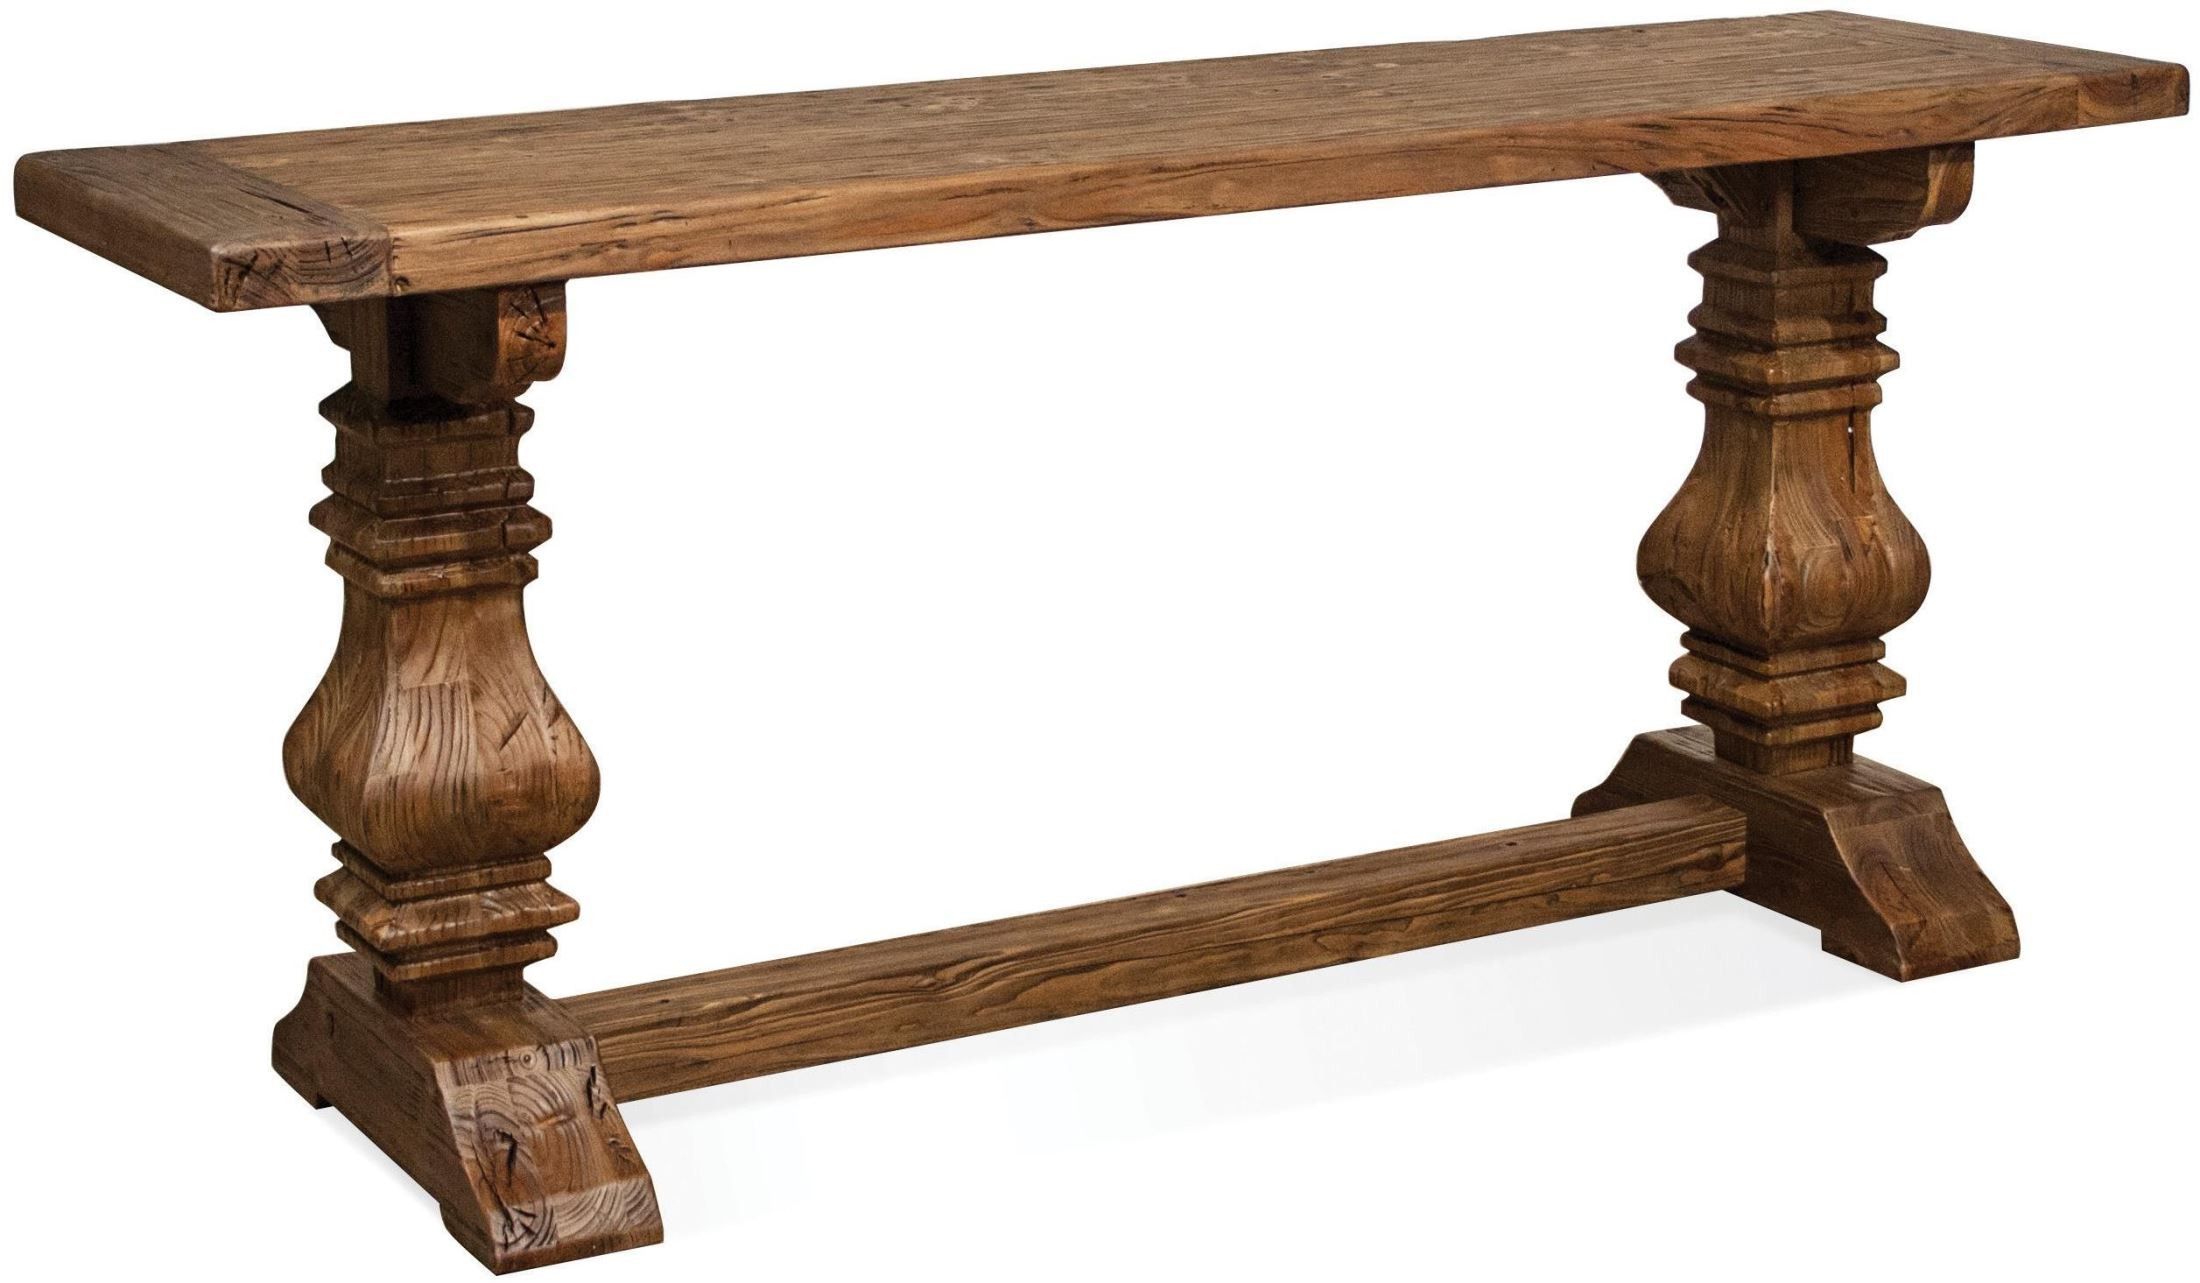 Hawthorne Barnwood Console Table From Riverside Furniture Throughout Smoked Barnwood Console Tables (View 7 of 20)